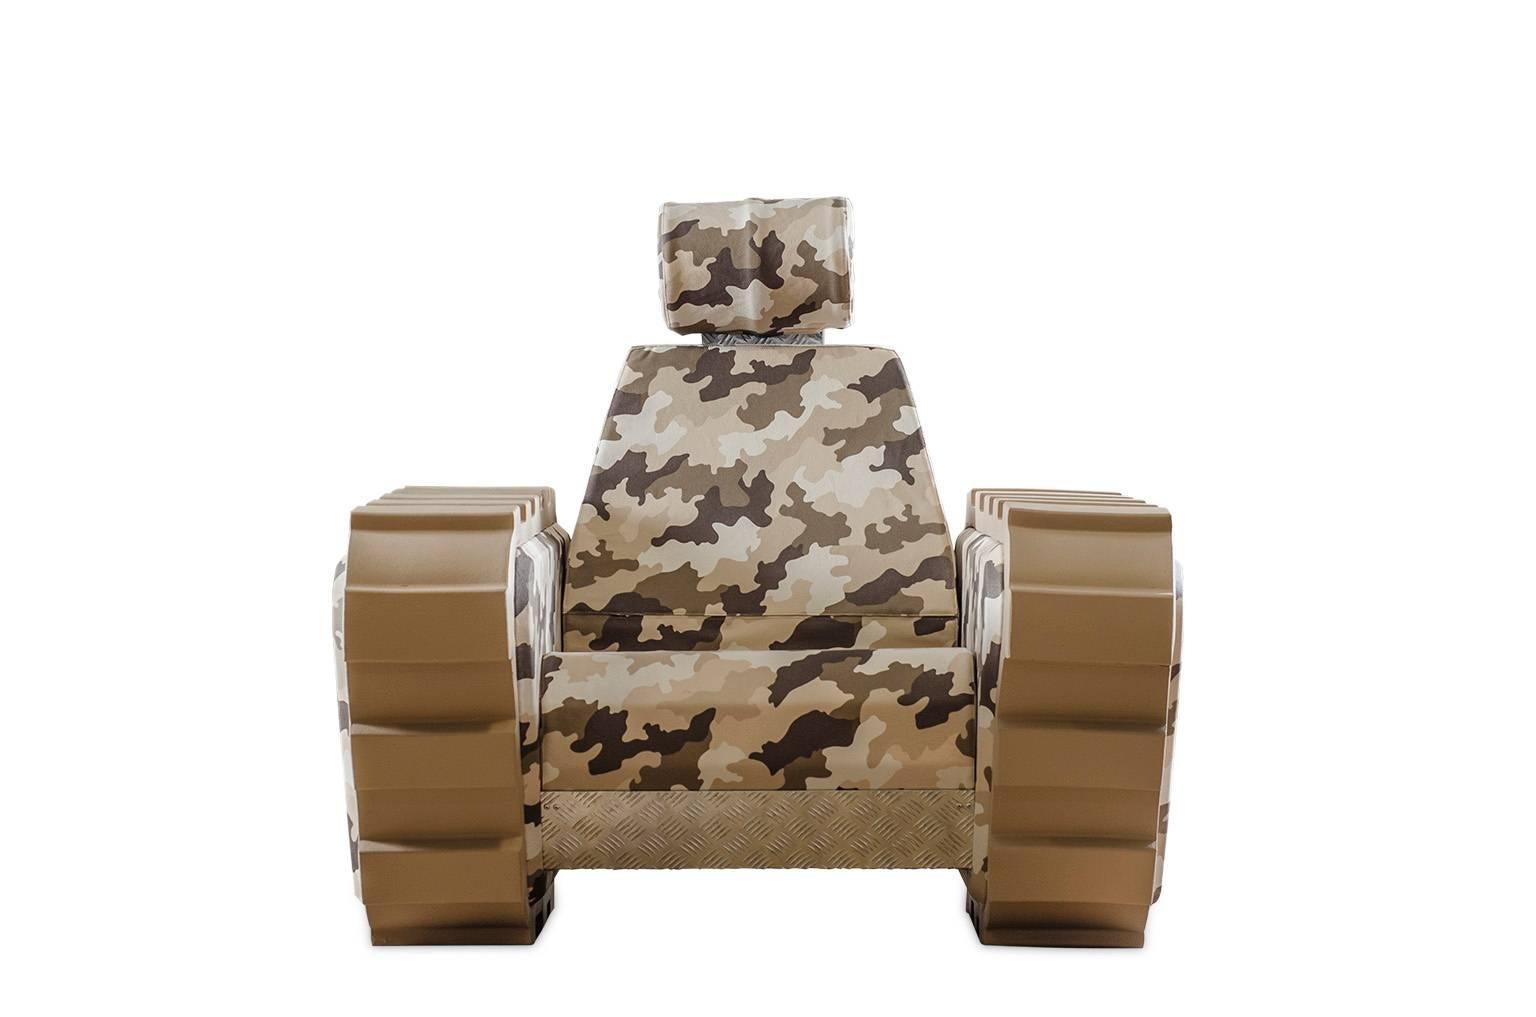 The military symbols turn in to peace messages.
An harmless tank that loose his war instinct , that in a funny way become a big cosy seat.
Three versions of the armrest and Girdle personalize the Armychair, for the best expression, of the